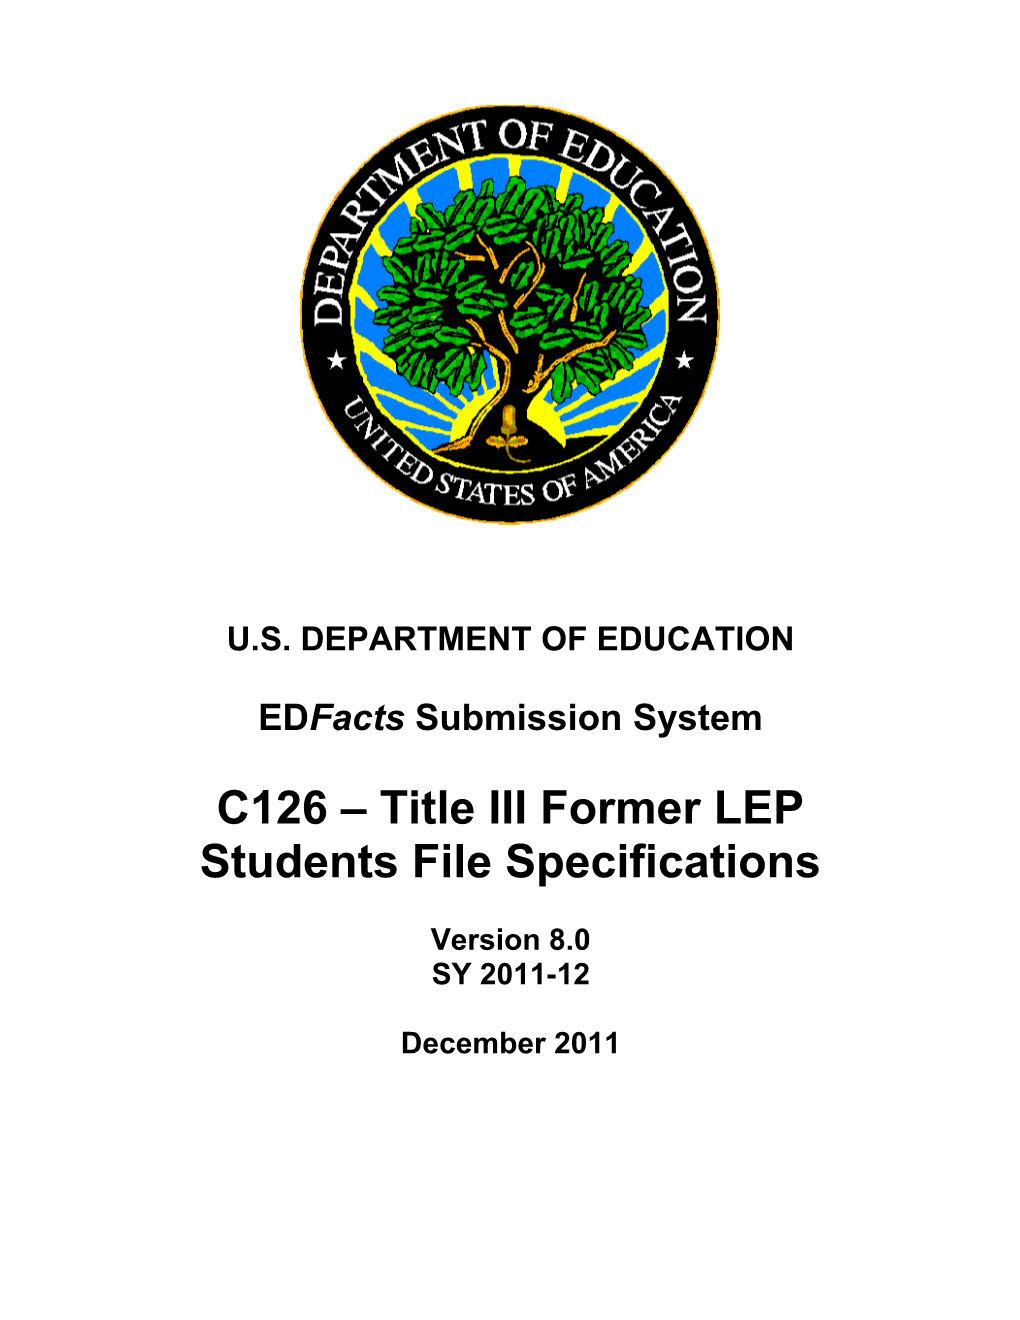 Title III Former LEP Students File Specifications